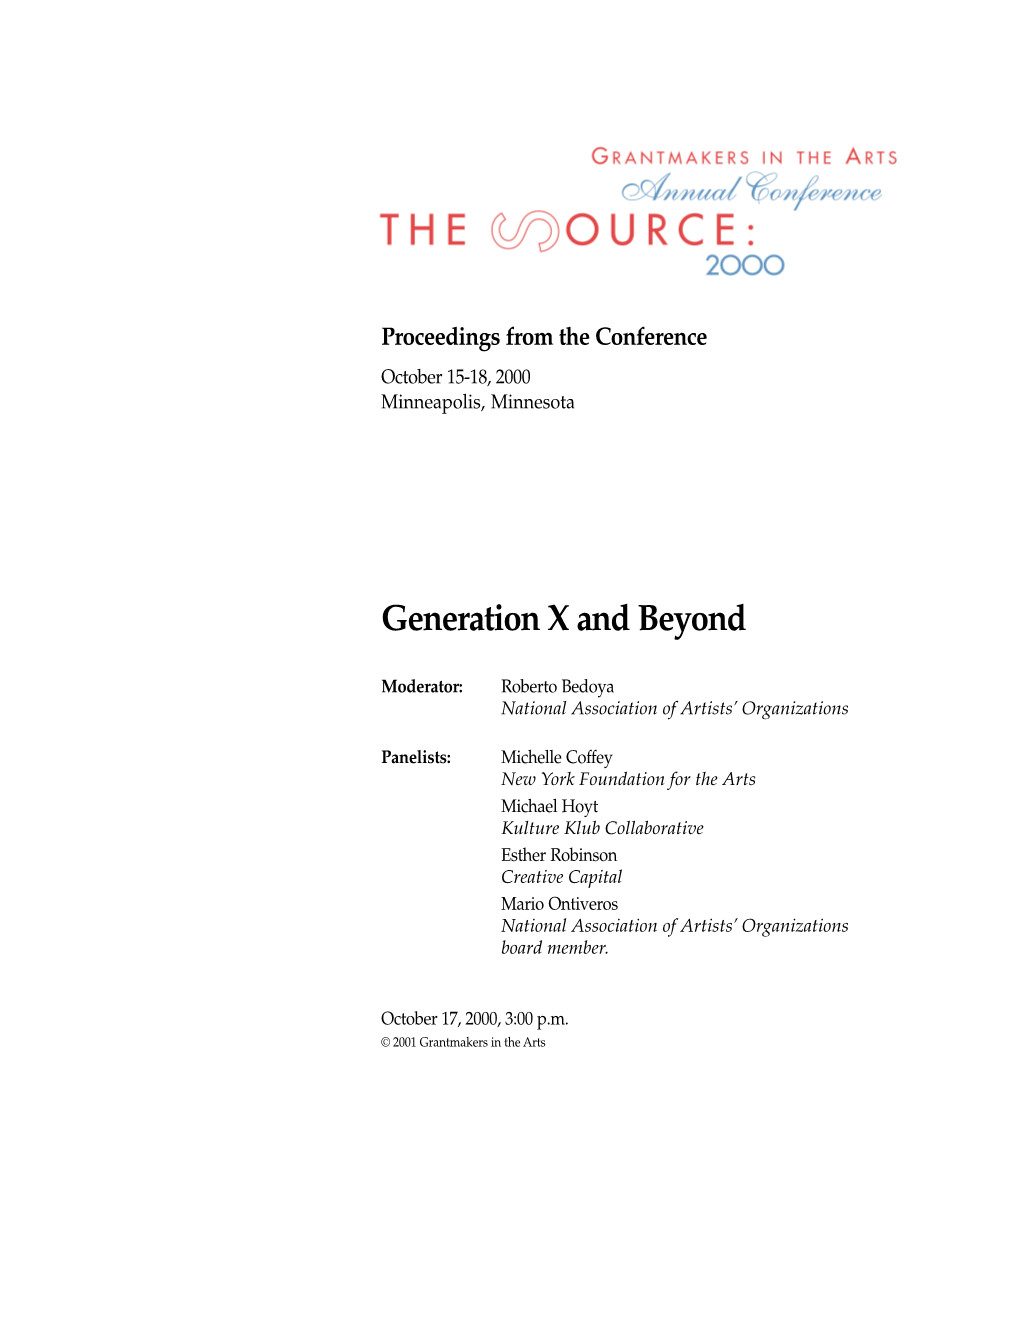 Generation X and Beyond